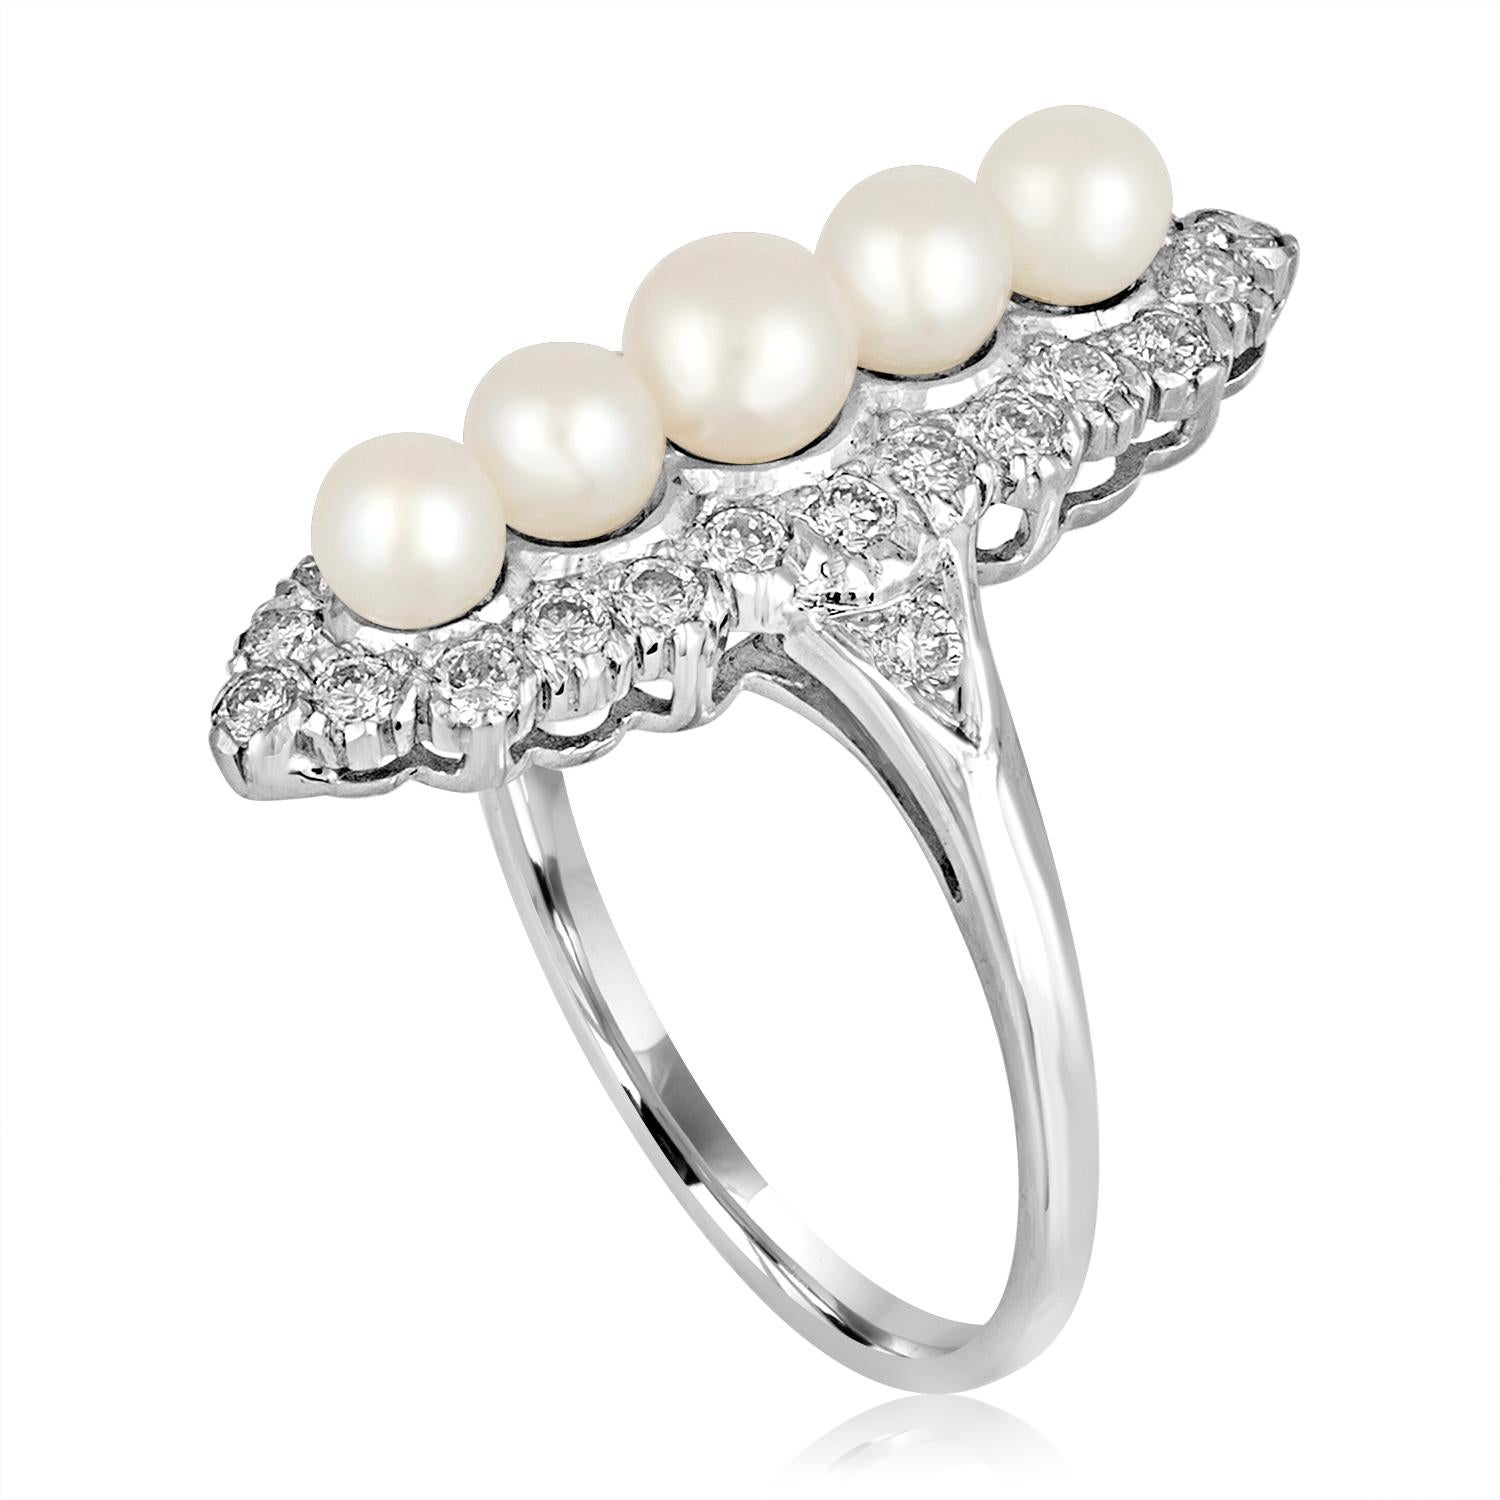 Pearl & Diamond Ring.
The ring is 18K White Gold.
There are 0.65 Carats in Diamonds H SI.
There are 5 Cultured Freshwater Pearls 3.7mm-4.3mm.
The ring measures 1